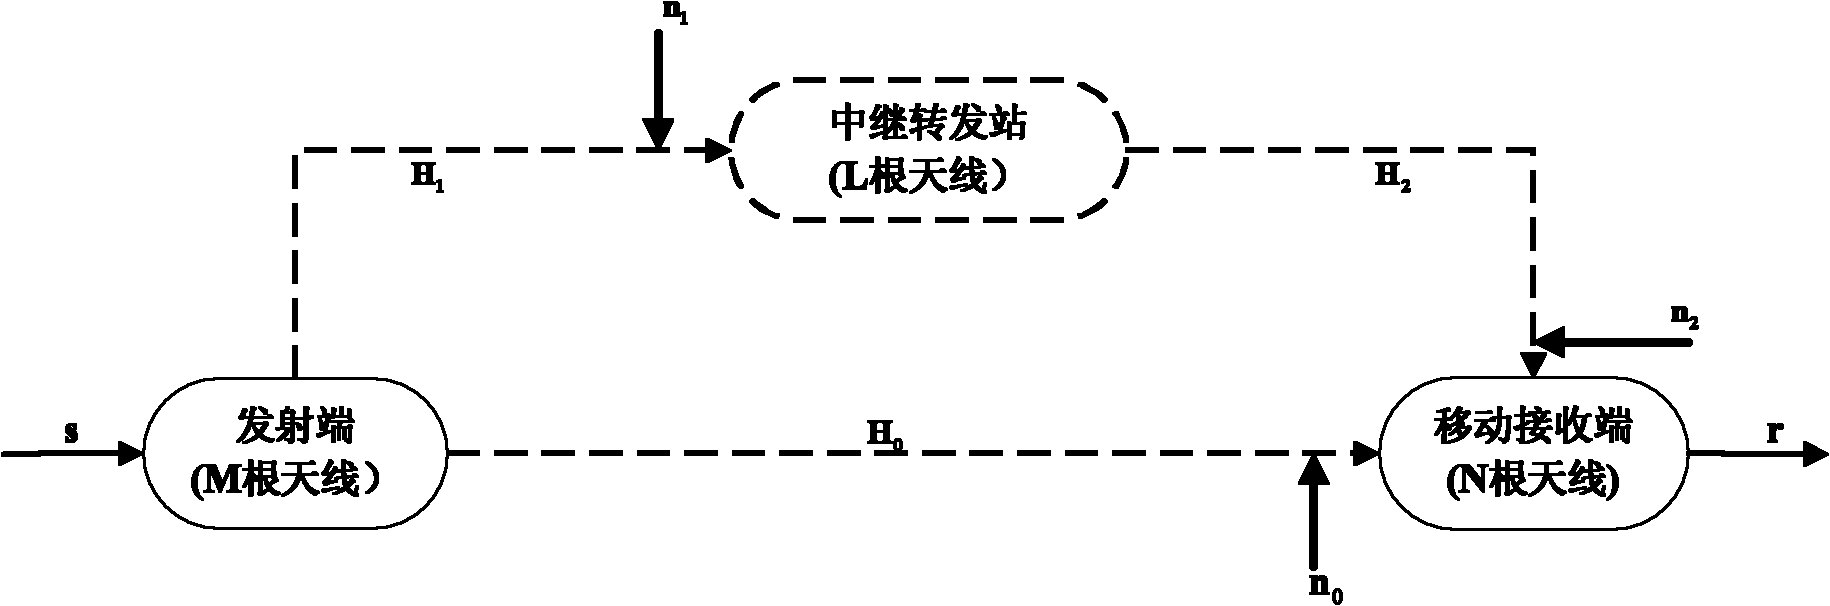 Communication method of multi-input multi-output system assisted by relay